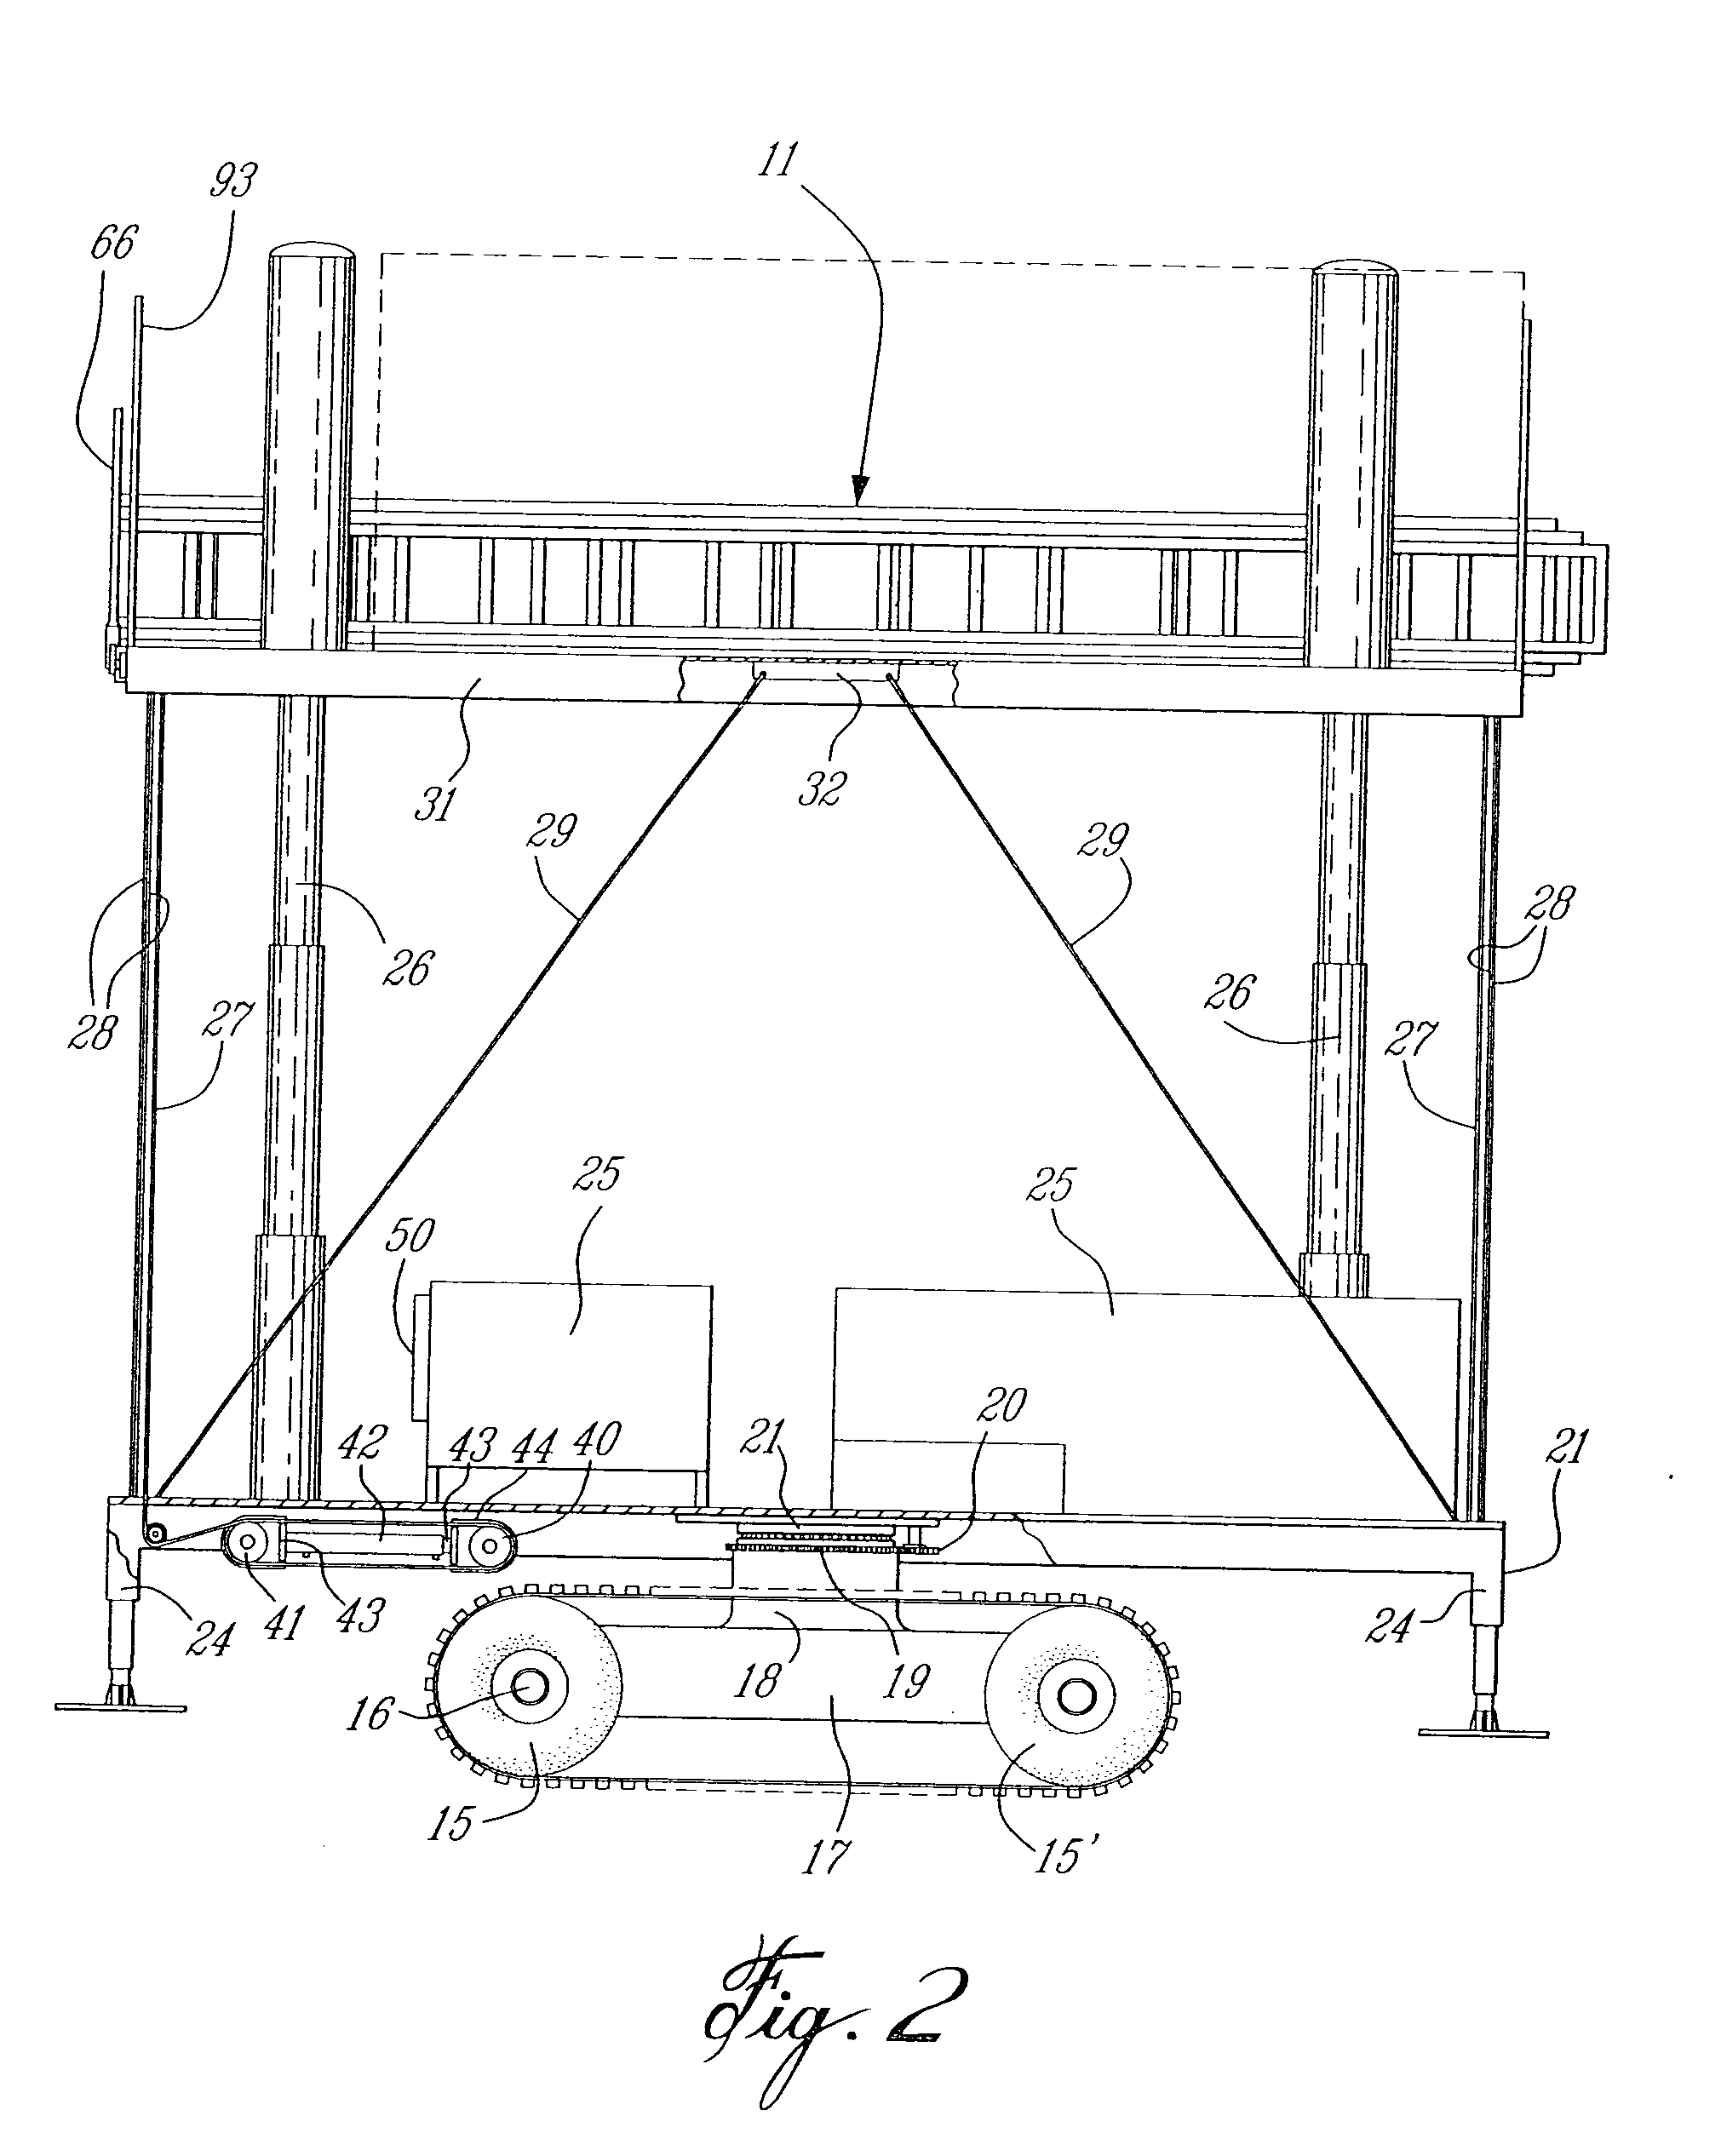 Motorized scaffold with displaceable worker support platform